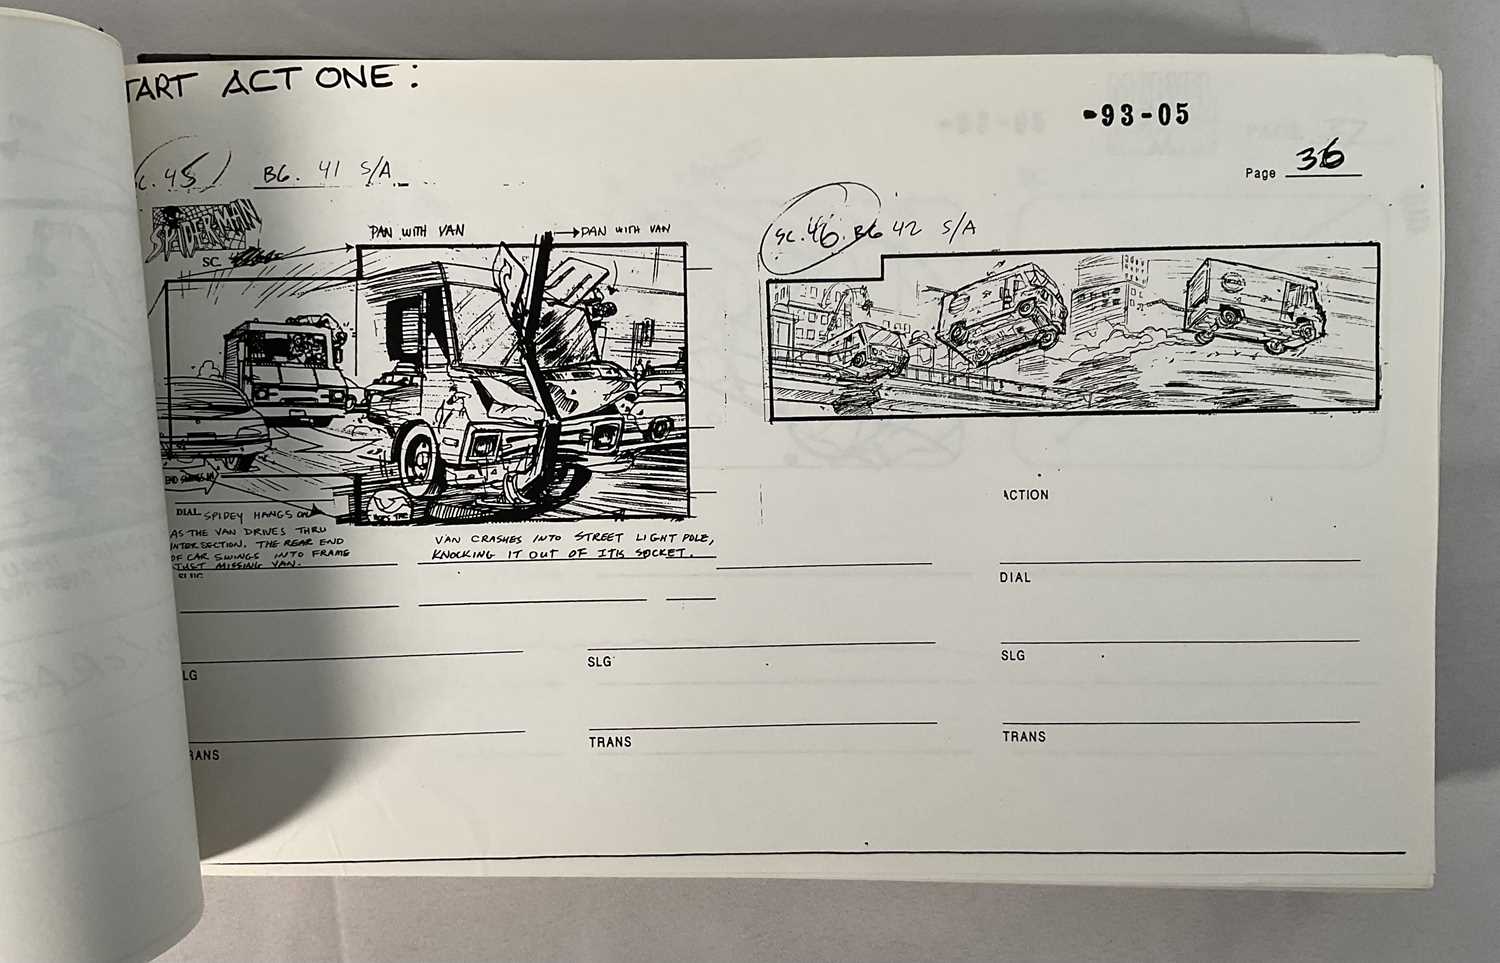 A folio of storyboards from the production of SPIDER-MAN the animated series, signed and stamped - Image 9 of 9